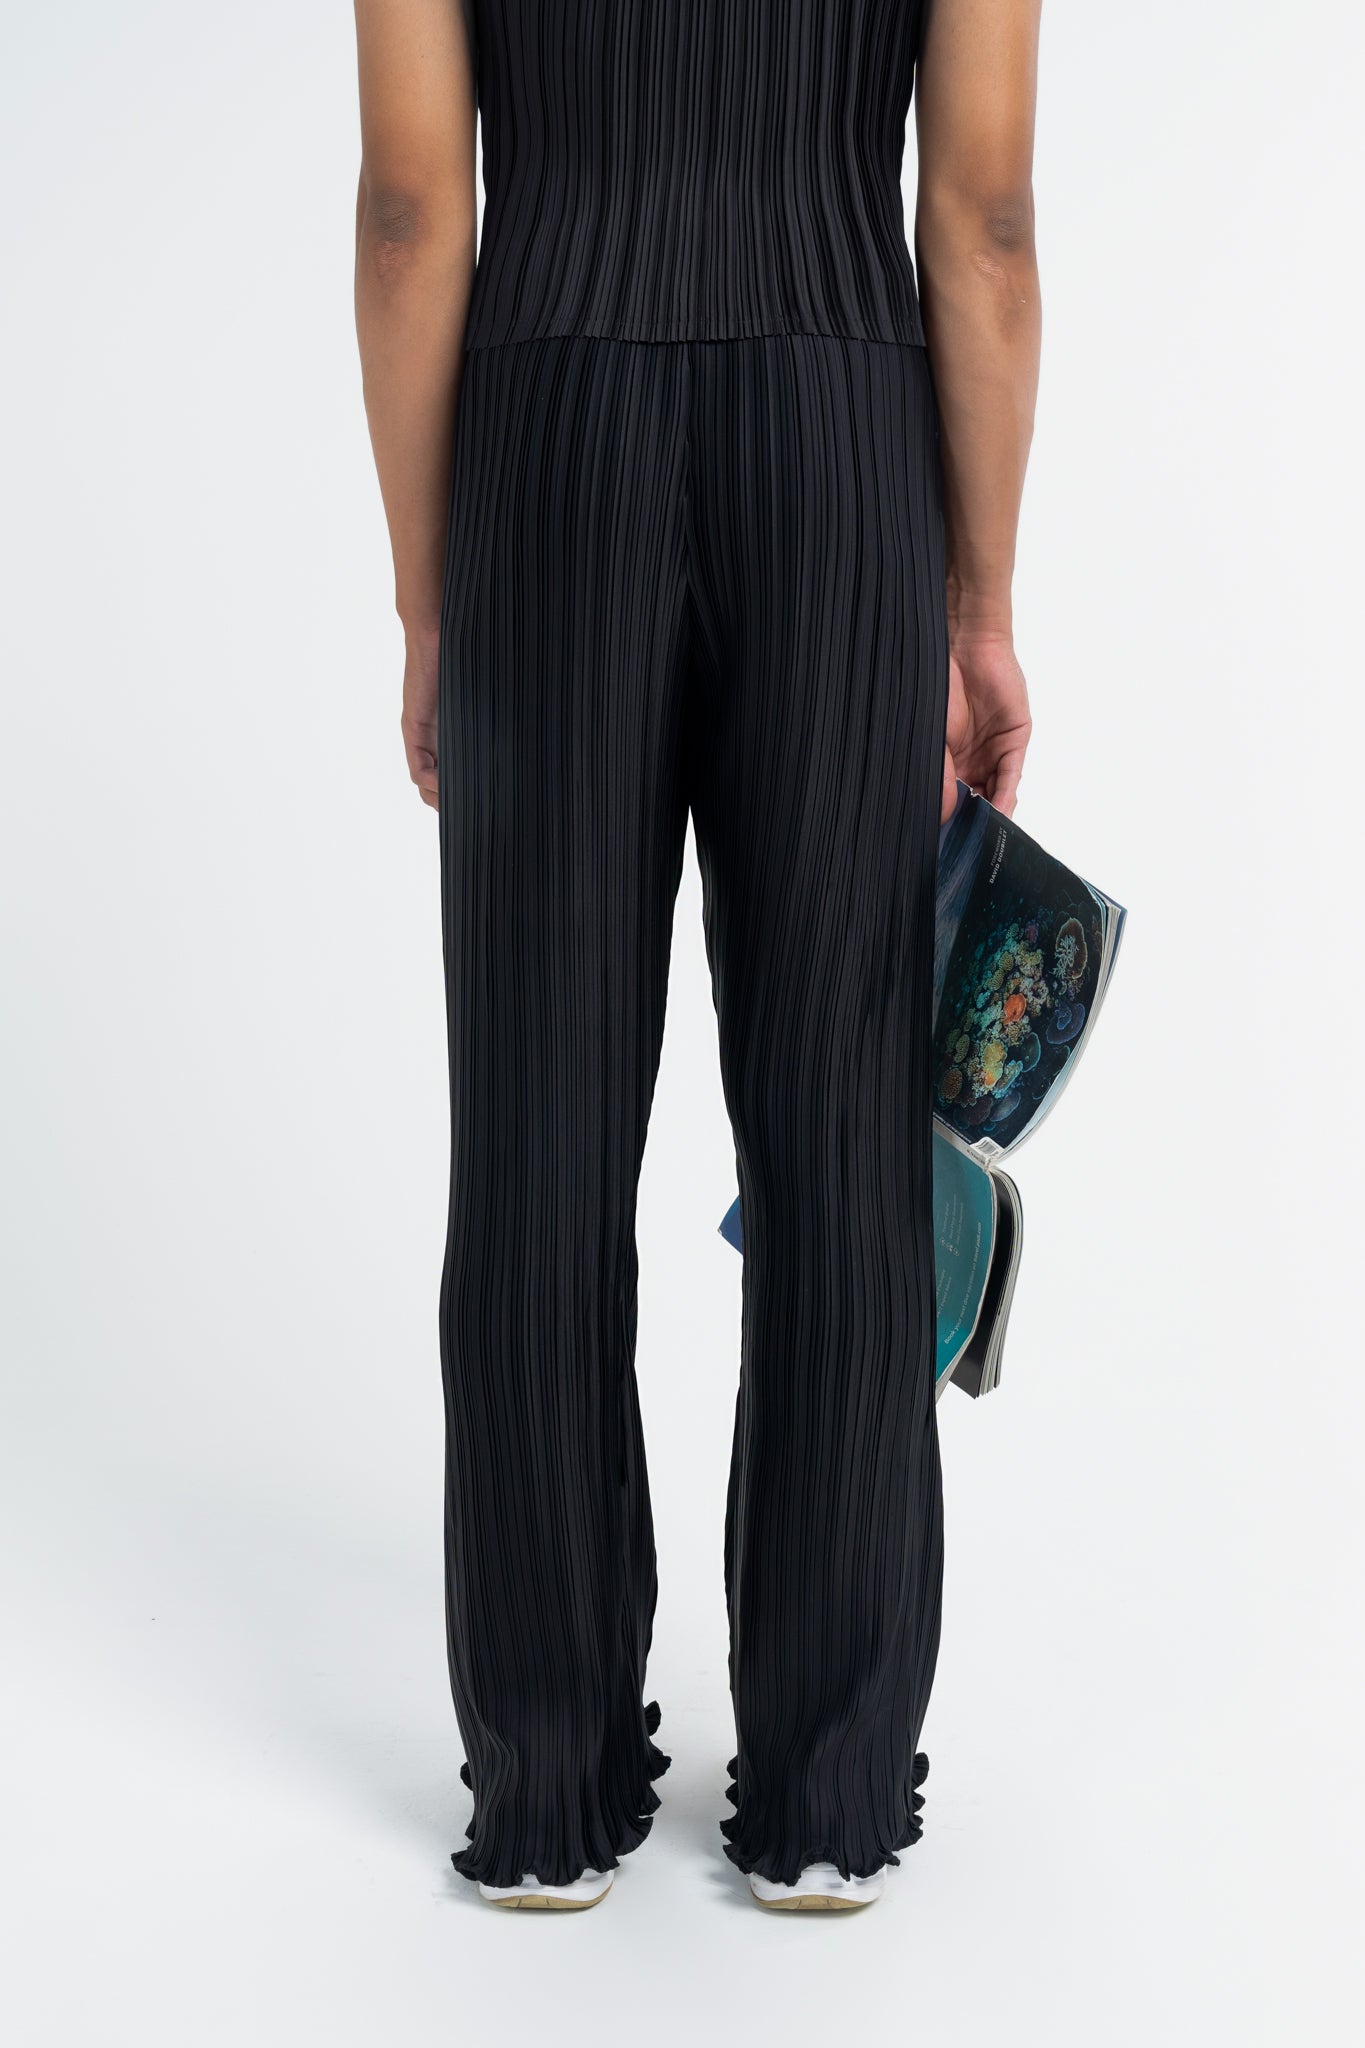 Arthur Apparel Menswear Solid Black High-Rise Pleated Flare Pants with Lettuce Edge in Polyester